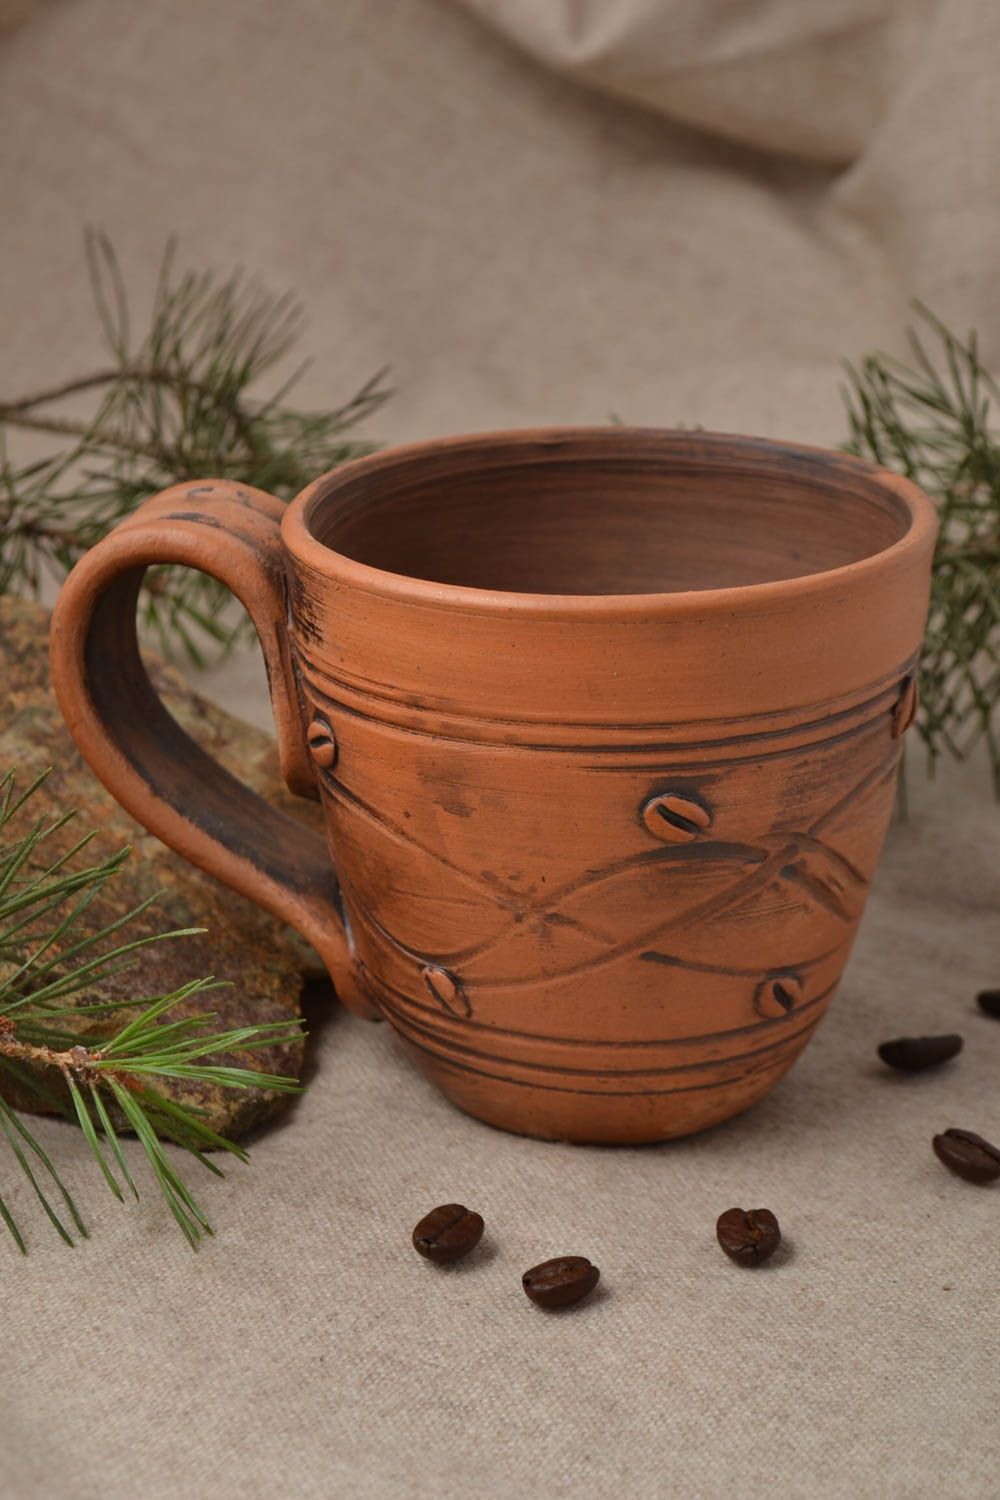 xl giant 13 oz clay coffee or tea mug with handle and beans pattern 0,6 lb photo 1